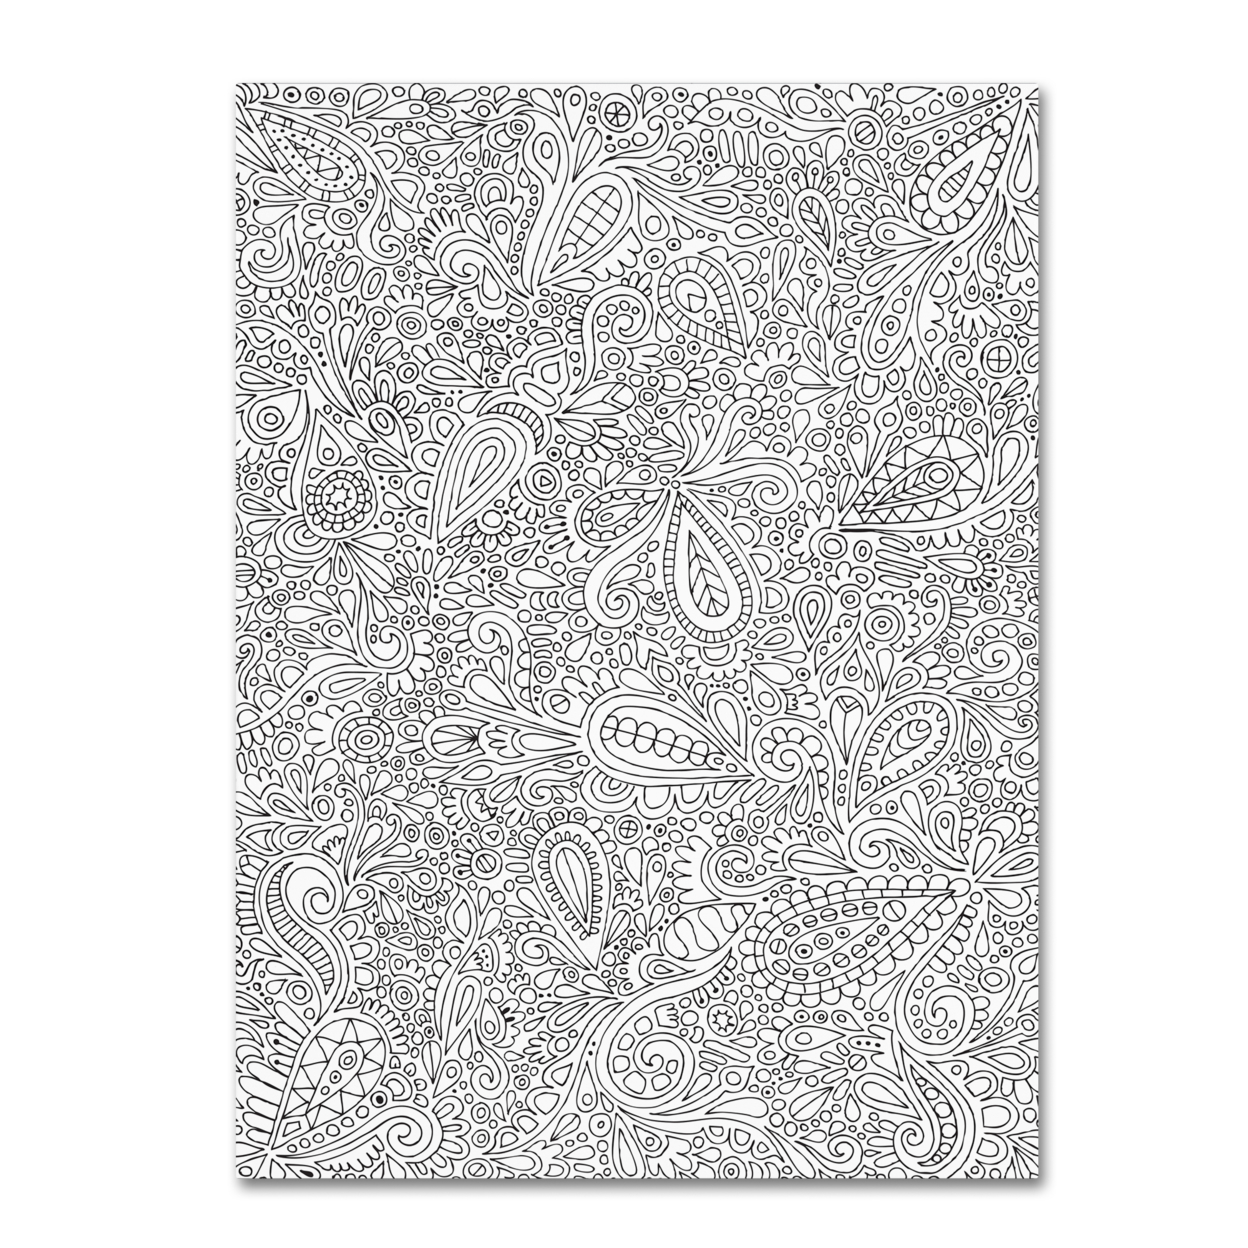 Hello Angel 'Oodles Of Doodles' Canvas Art 18 X 24